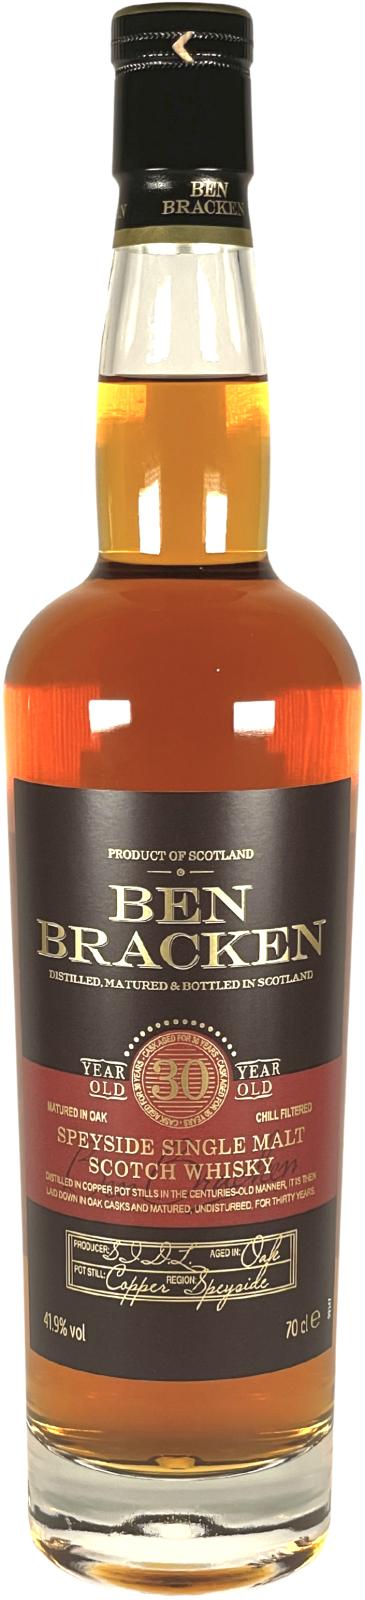 Ben Bracken 30-year-old TSID - Ratings and reviews - Whiskybase